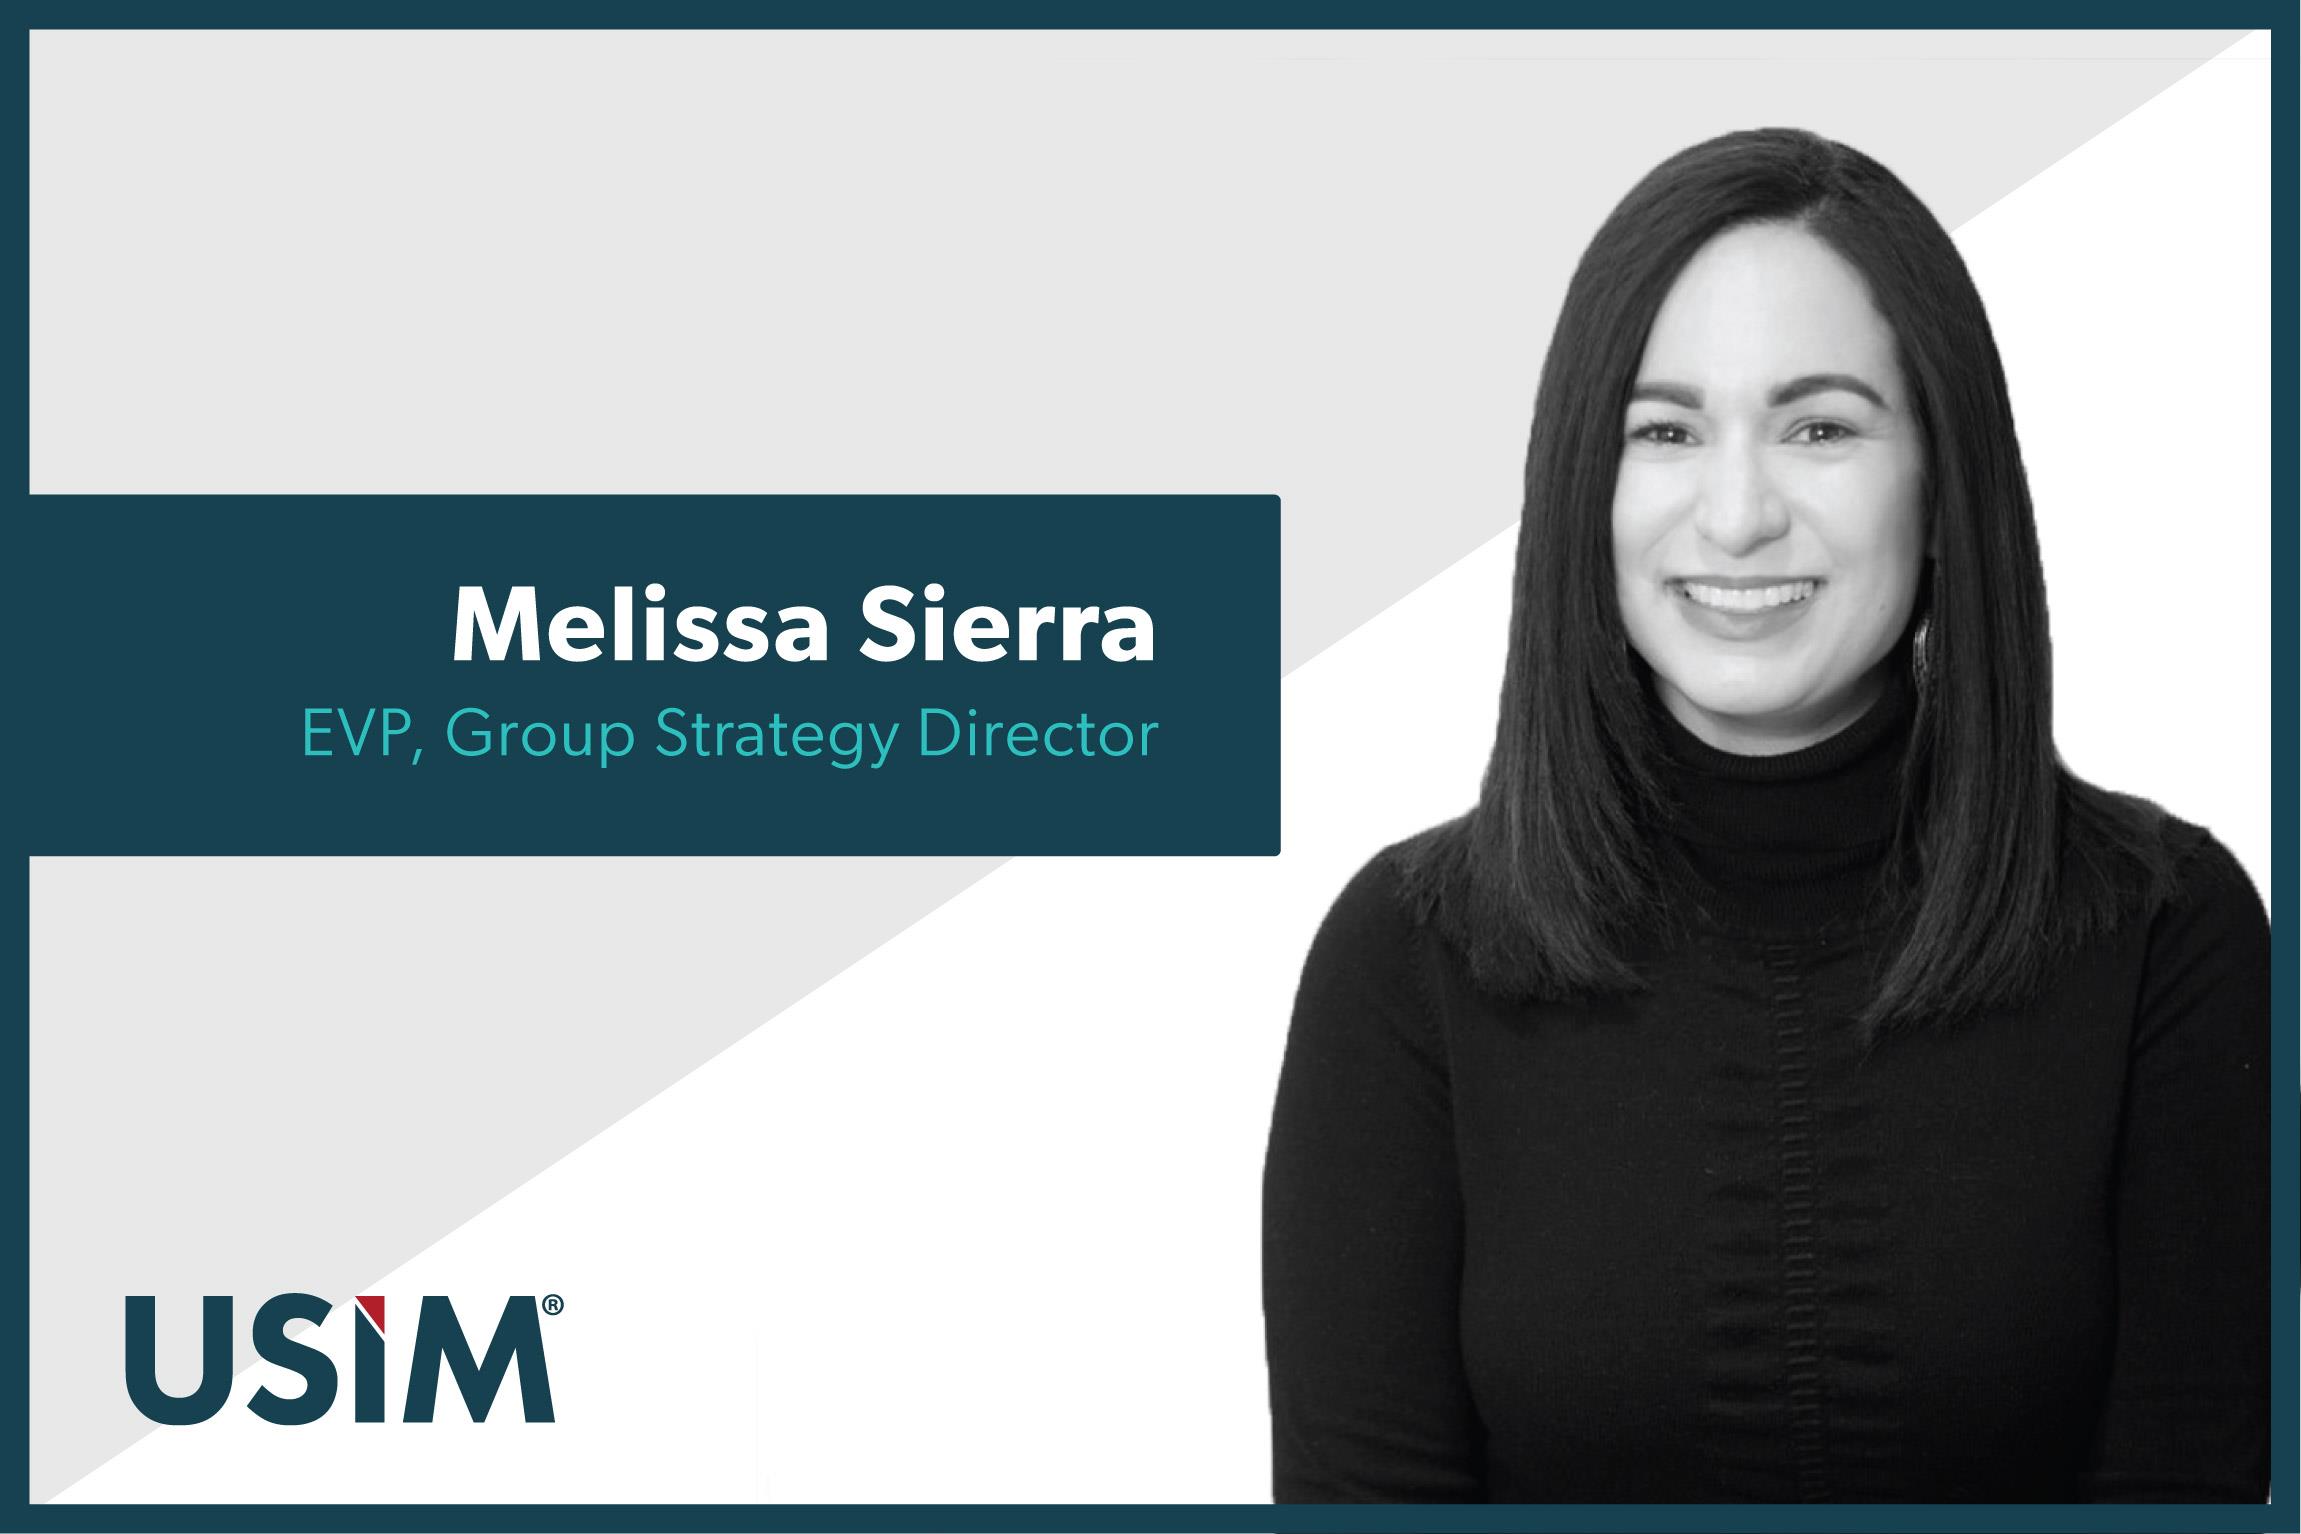 USIM Welcomes Back Melissa Sierra as the Executive Vice President, Group Strategy Director